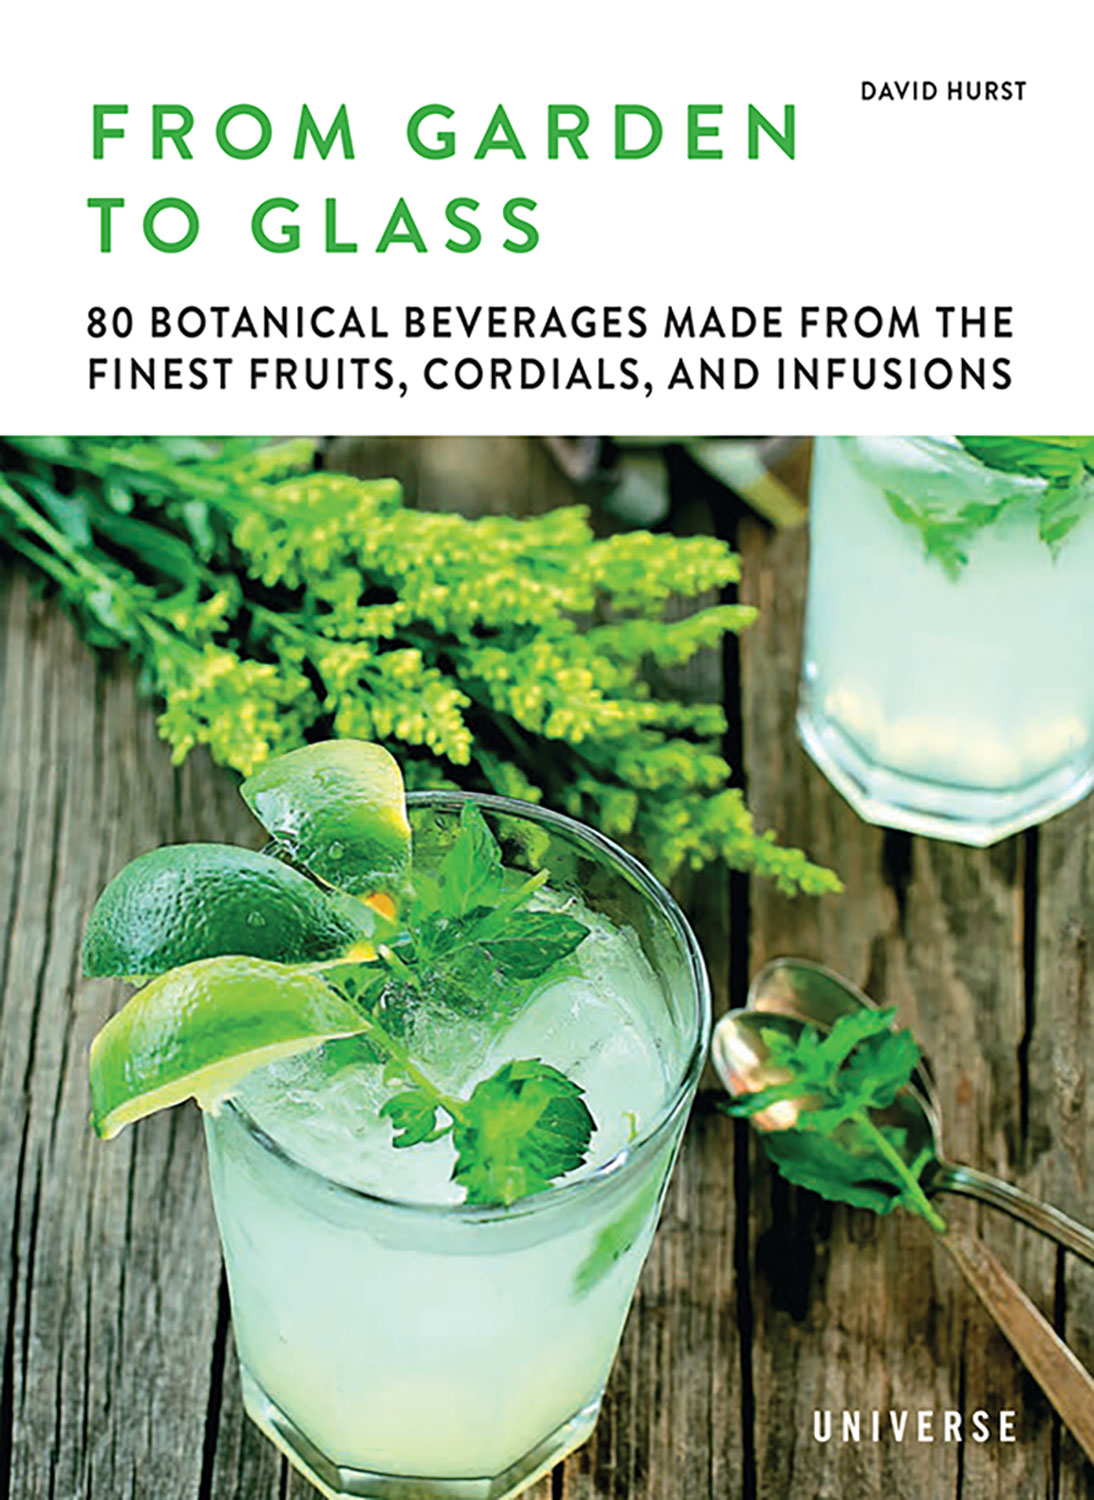 Book cover for "From Garden to Glass: 80 Botanical Beverages Made From the Finest Fruits, Cordials, and Infusions " by David Hurst (Universe Publishing, 2019)